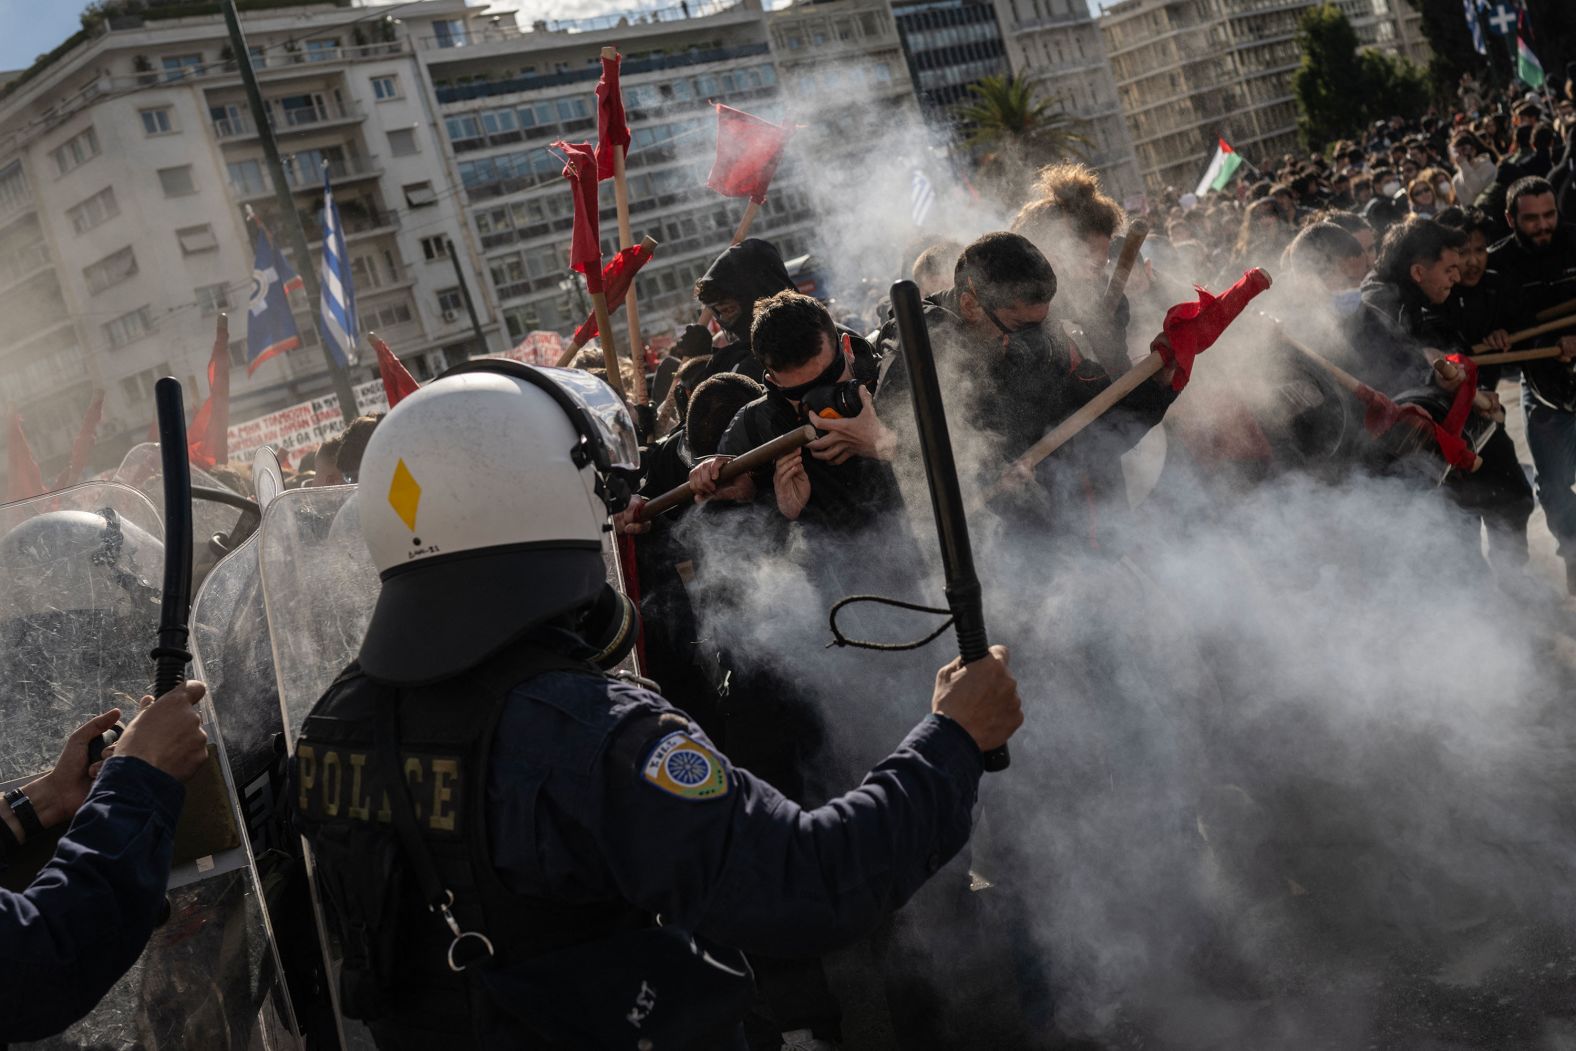 Police clash with protesters during a student demonstration in front of the Greek Parliament in Athens on Friday, March 8. Thousands of students protested a day before lawmakers passed a bill that will allow foreign private universities to set up branches in the country,<a href="index.php?page=&url=https%3A%2F%2Fwww.reuters.com%2Fworld%2Feurope%2Fgreek-parliament-approves-private-foreign-universities-bucking-protests-2024-03-09%2F" target="_blank" target="_blank"> according to the Reuters news agency</a>.